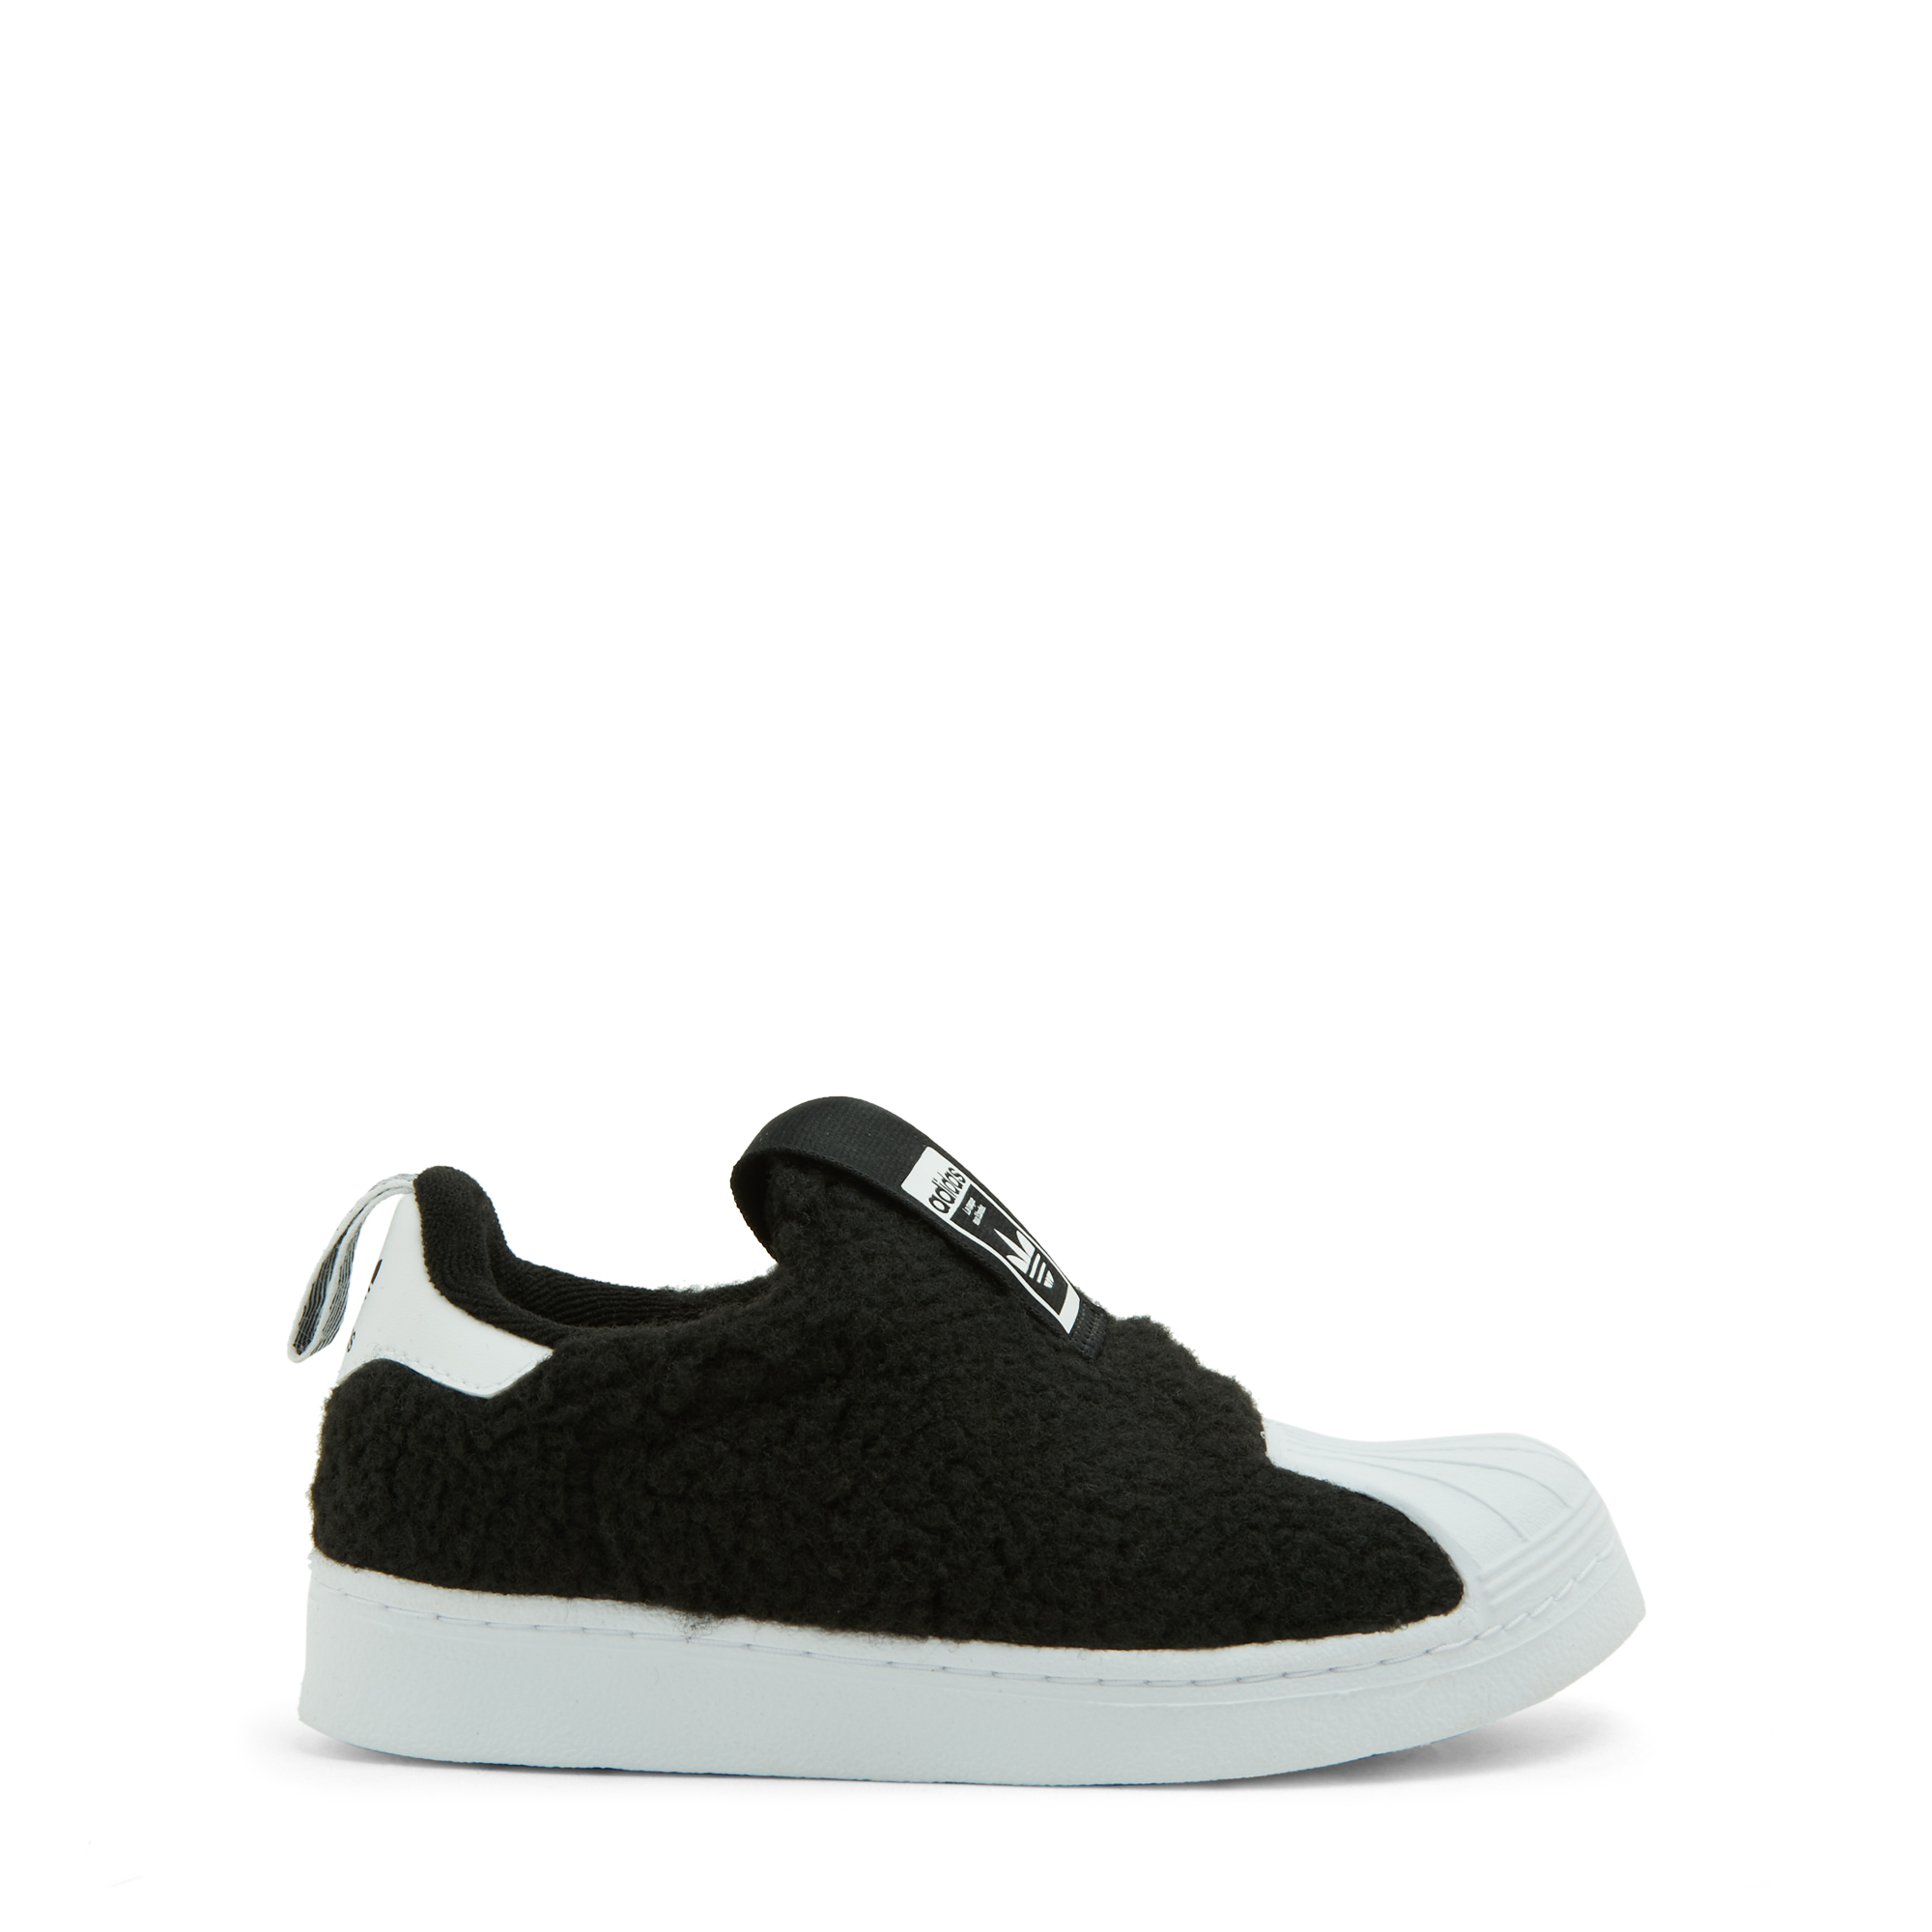 Adidas Superstar 360 C sneakers for Boy - Black in UAE | Level Shoes